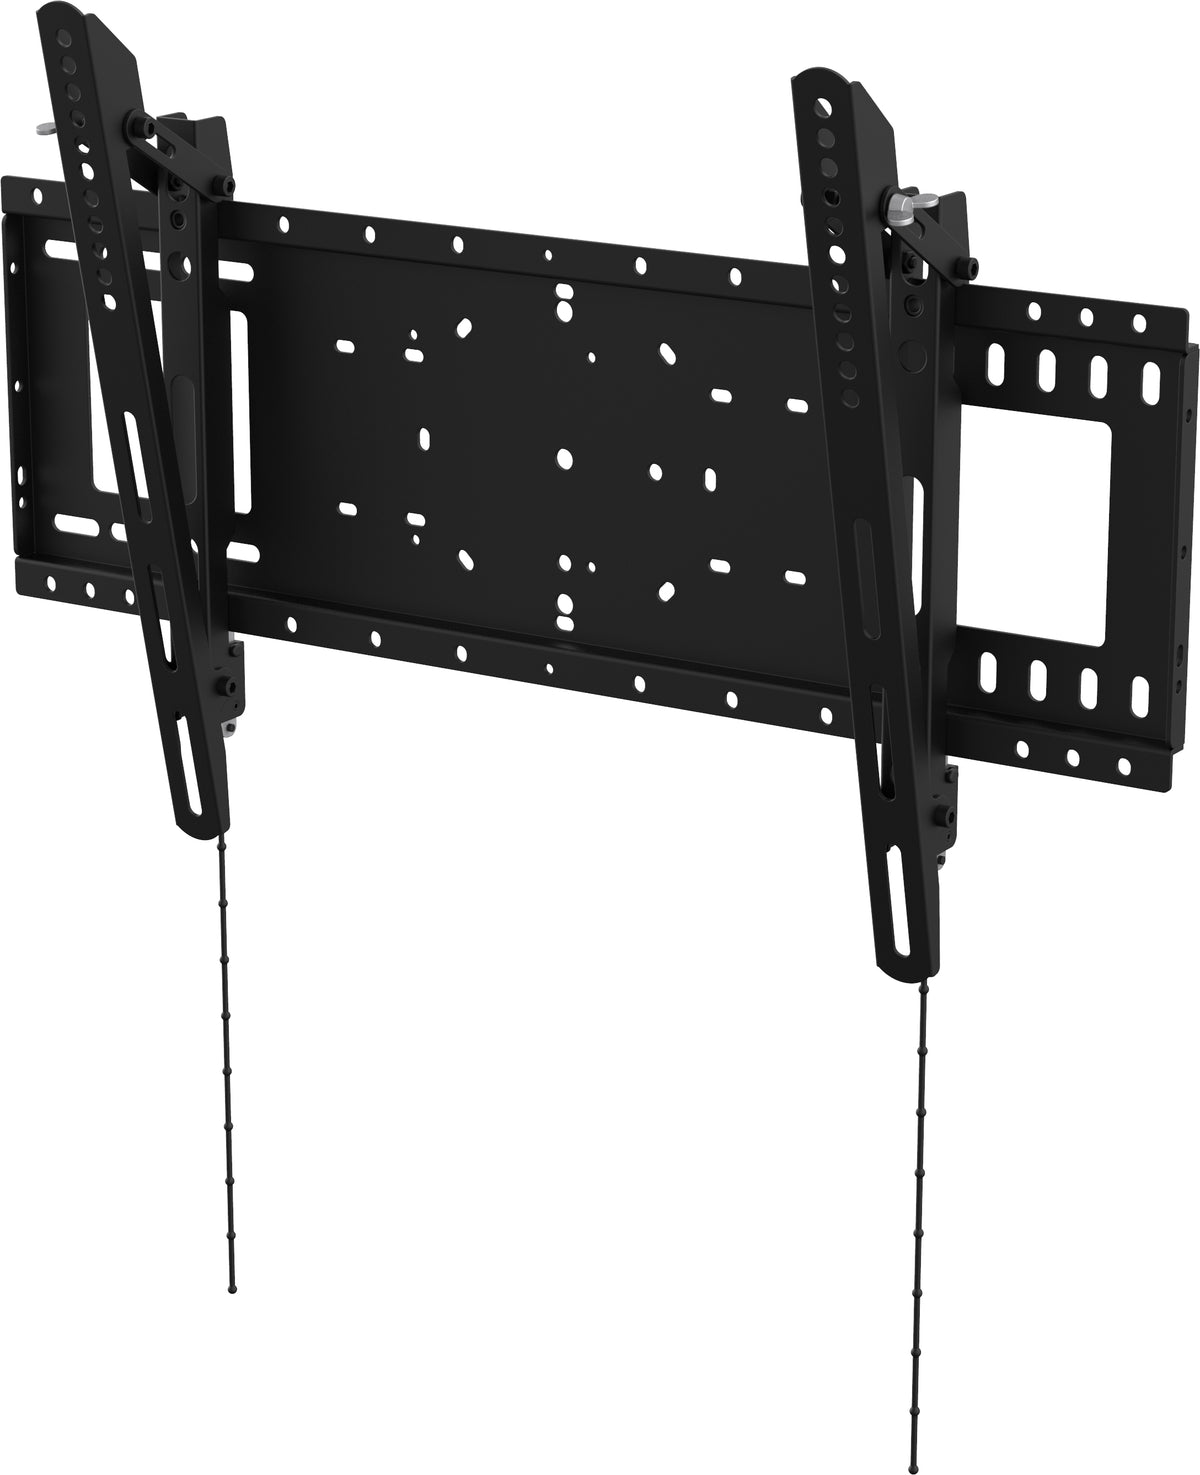 VISION Heavy Duty Tilting Display Wall Mount - LIFETIME WARRANTY - fits display 37 - 85" with VESA sizes up to 600 x 400 - 12 degree tilt - suits interactive flat panels or LED TVs - arms latch securely - cold-rolled steel - media player fixing - SWL